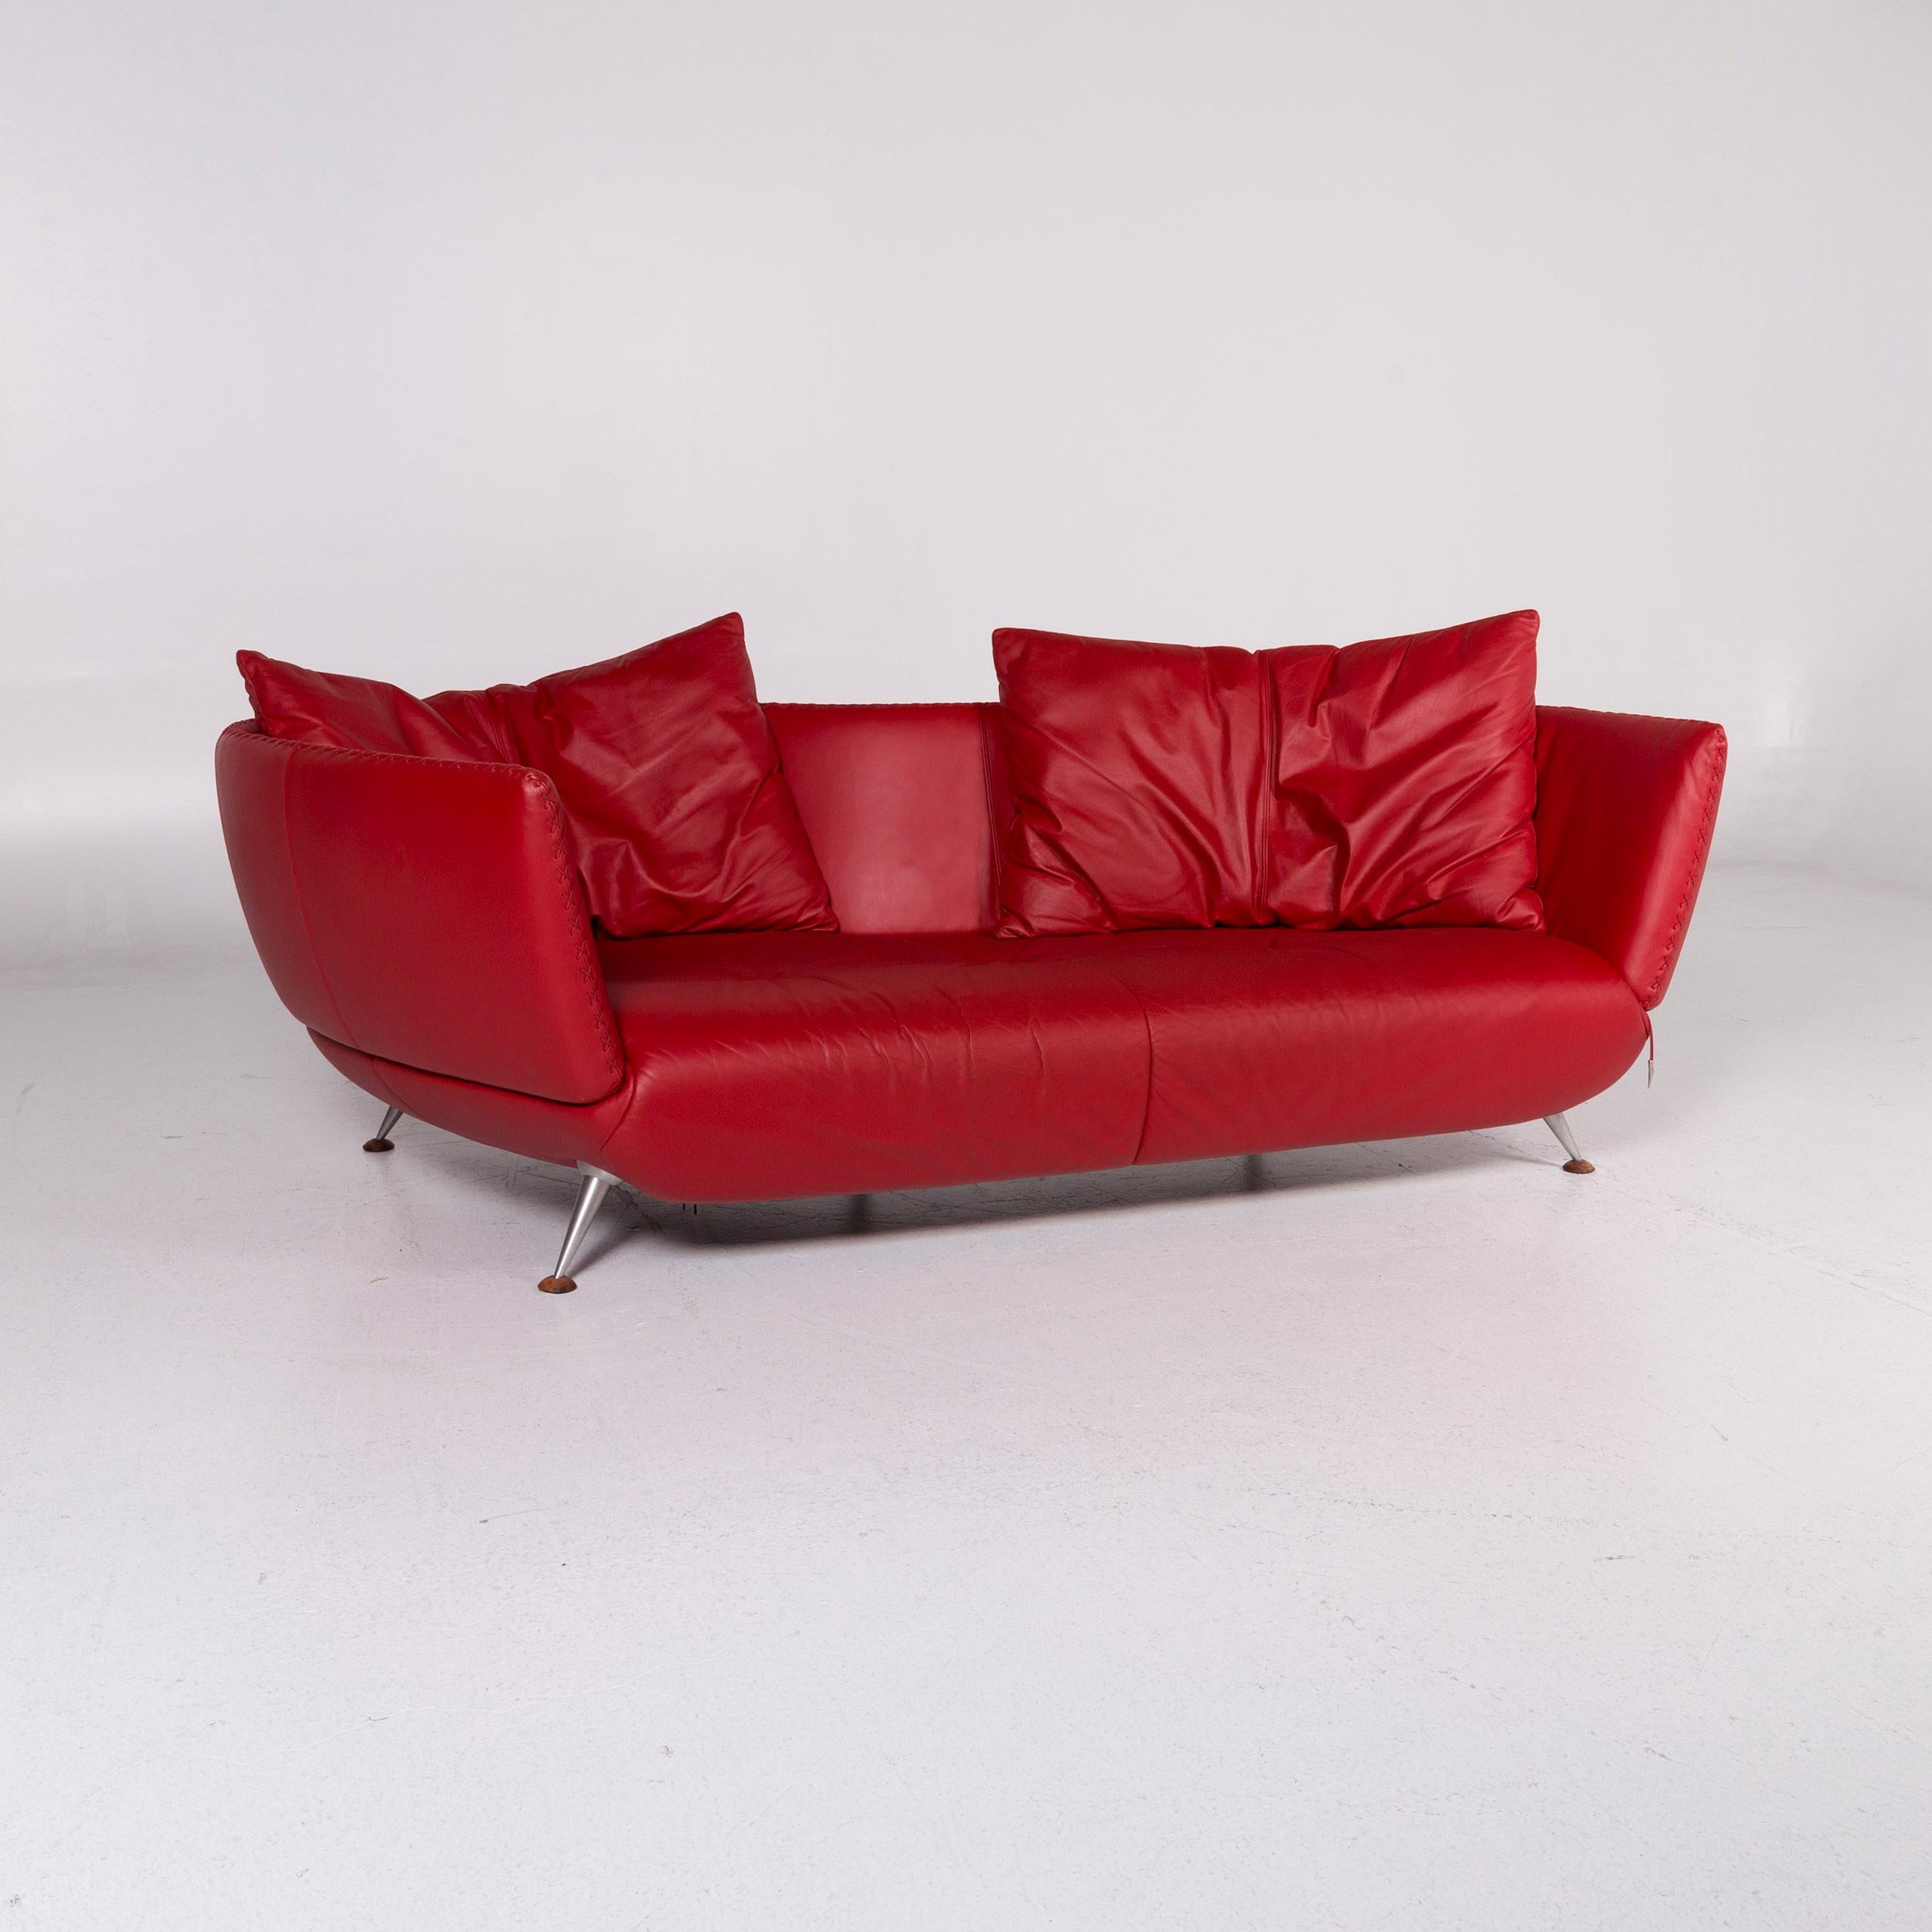 We bring to you a De Sede DS 102 leather sofa red three-seat couch.

 Product measurements in centimeters:
 
Depth 94
Width 226
Height 75
Seat-height 40
Rest-height 75
Seat-depth 75
Seat-width 173
Back-height 37.
 